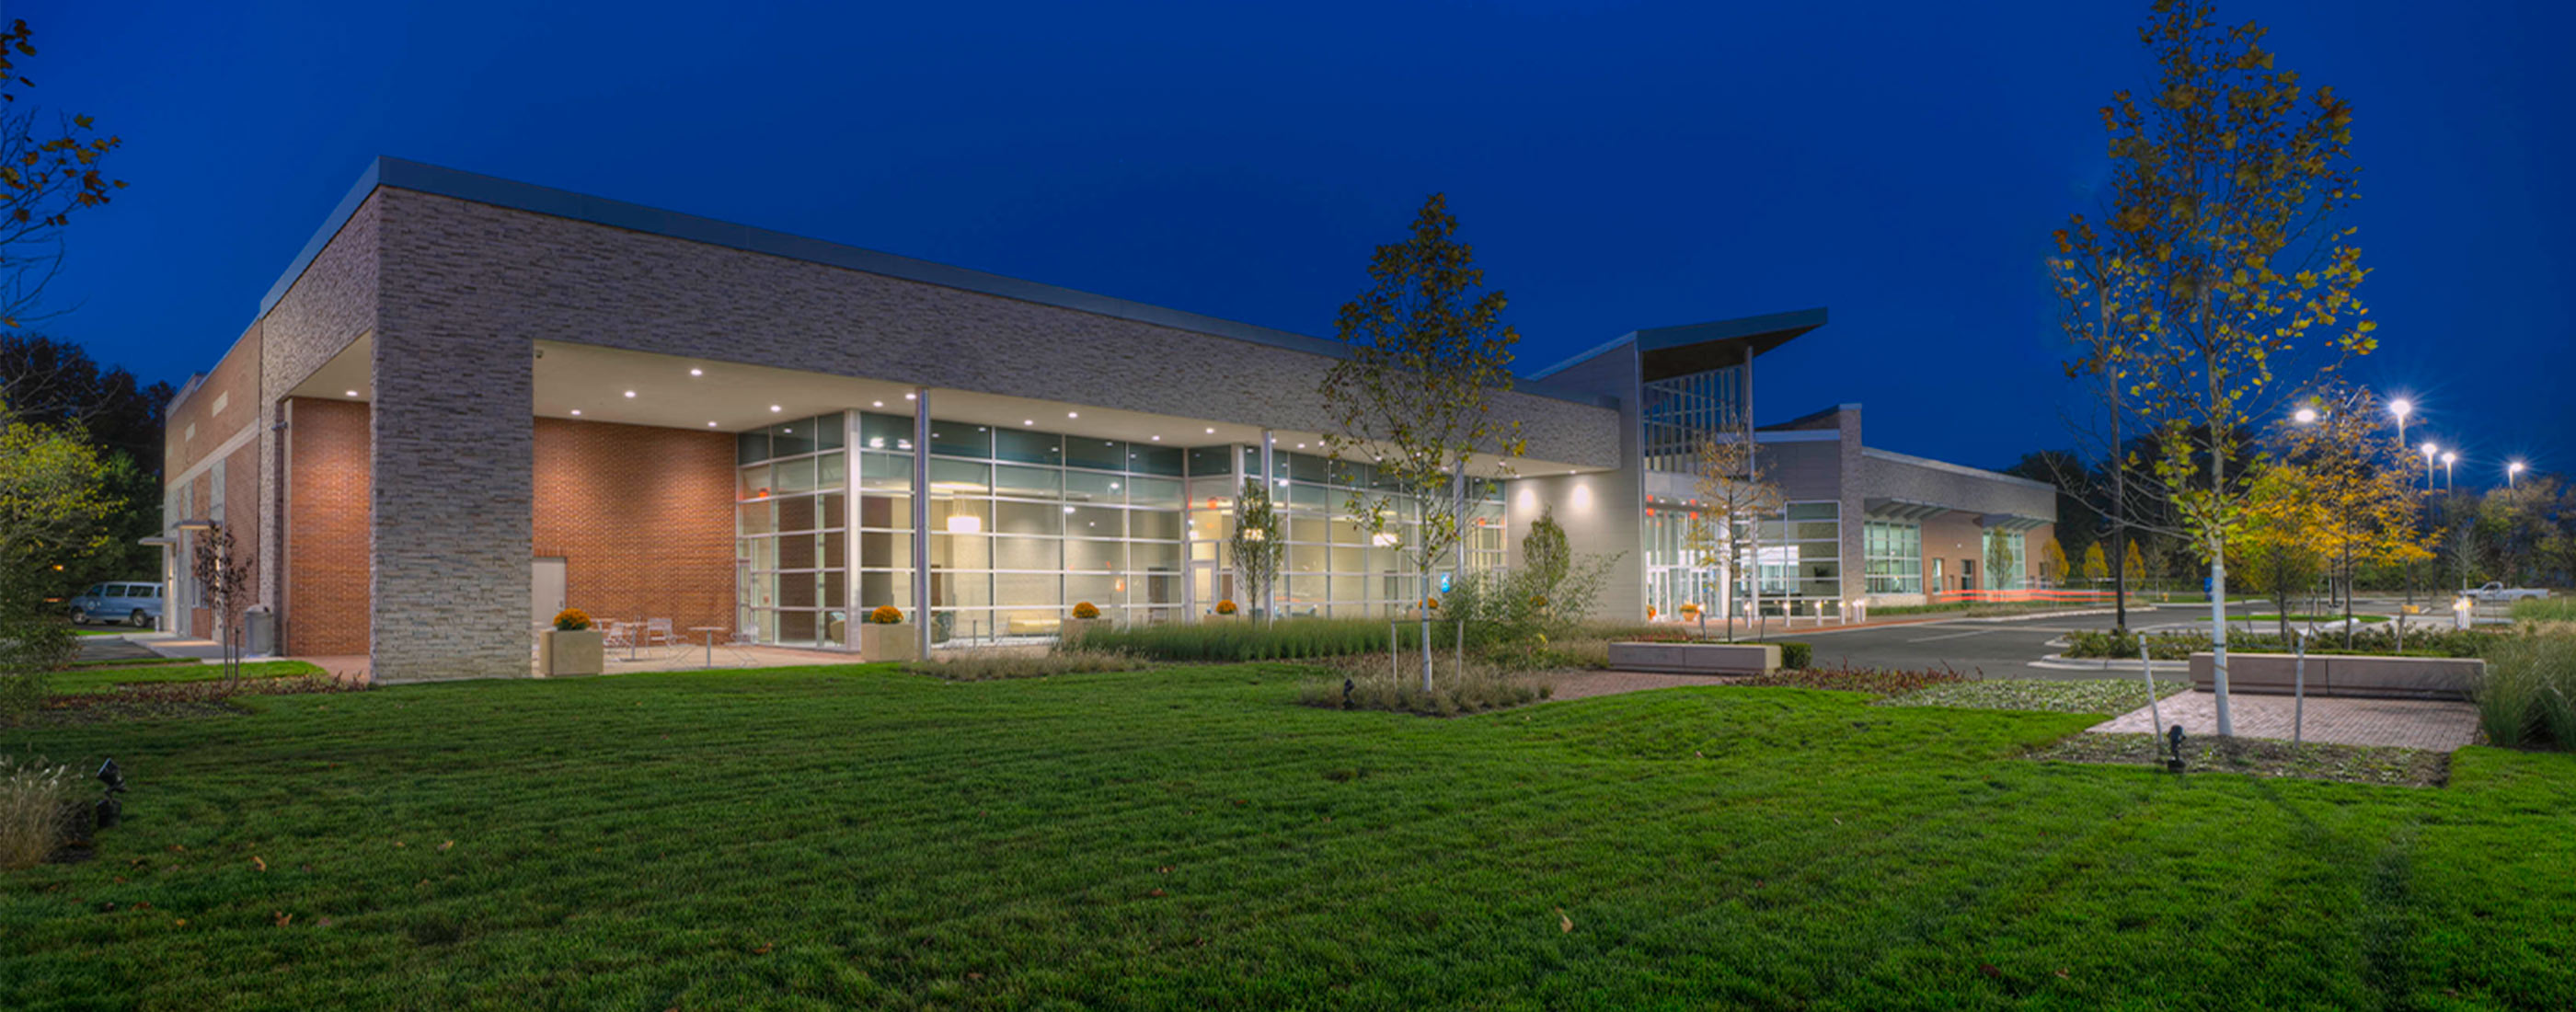 At Westland, Michigan’s City Hall, designed by OHM Advisors, a large entrance canopy connects the building to the new, extensive outdoor green space.